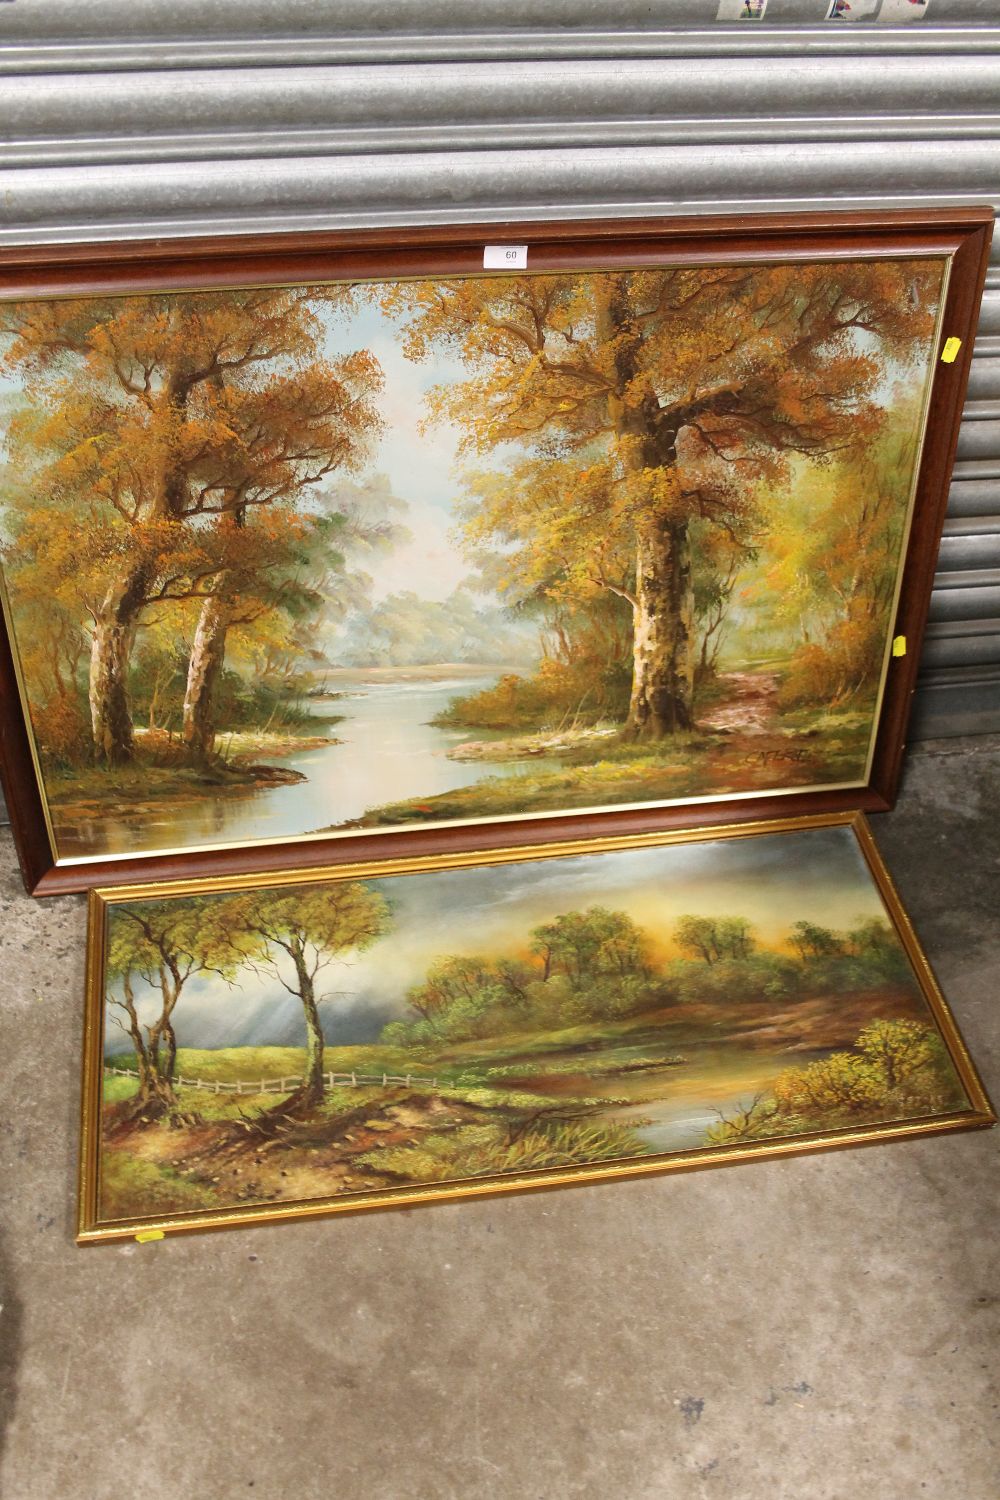 A LARGE FRAMED OIL ON CANVAS OF A WOODED RIVER LANDSCAPE SIGNED CAFEIRI, TOGETHER WITH A FRAMED